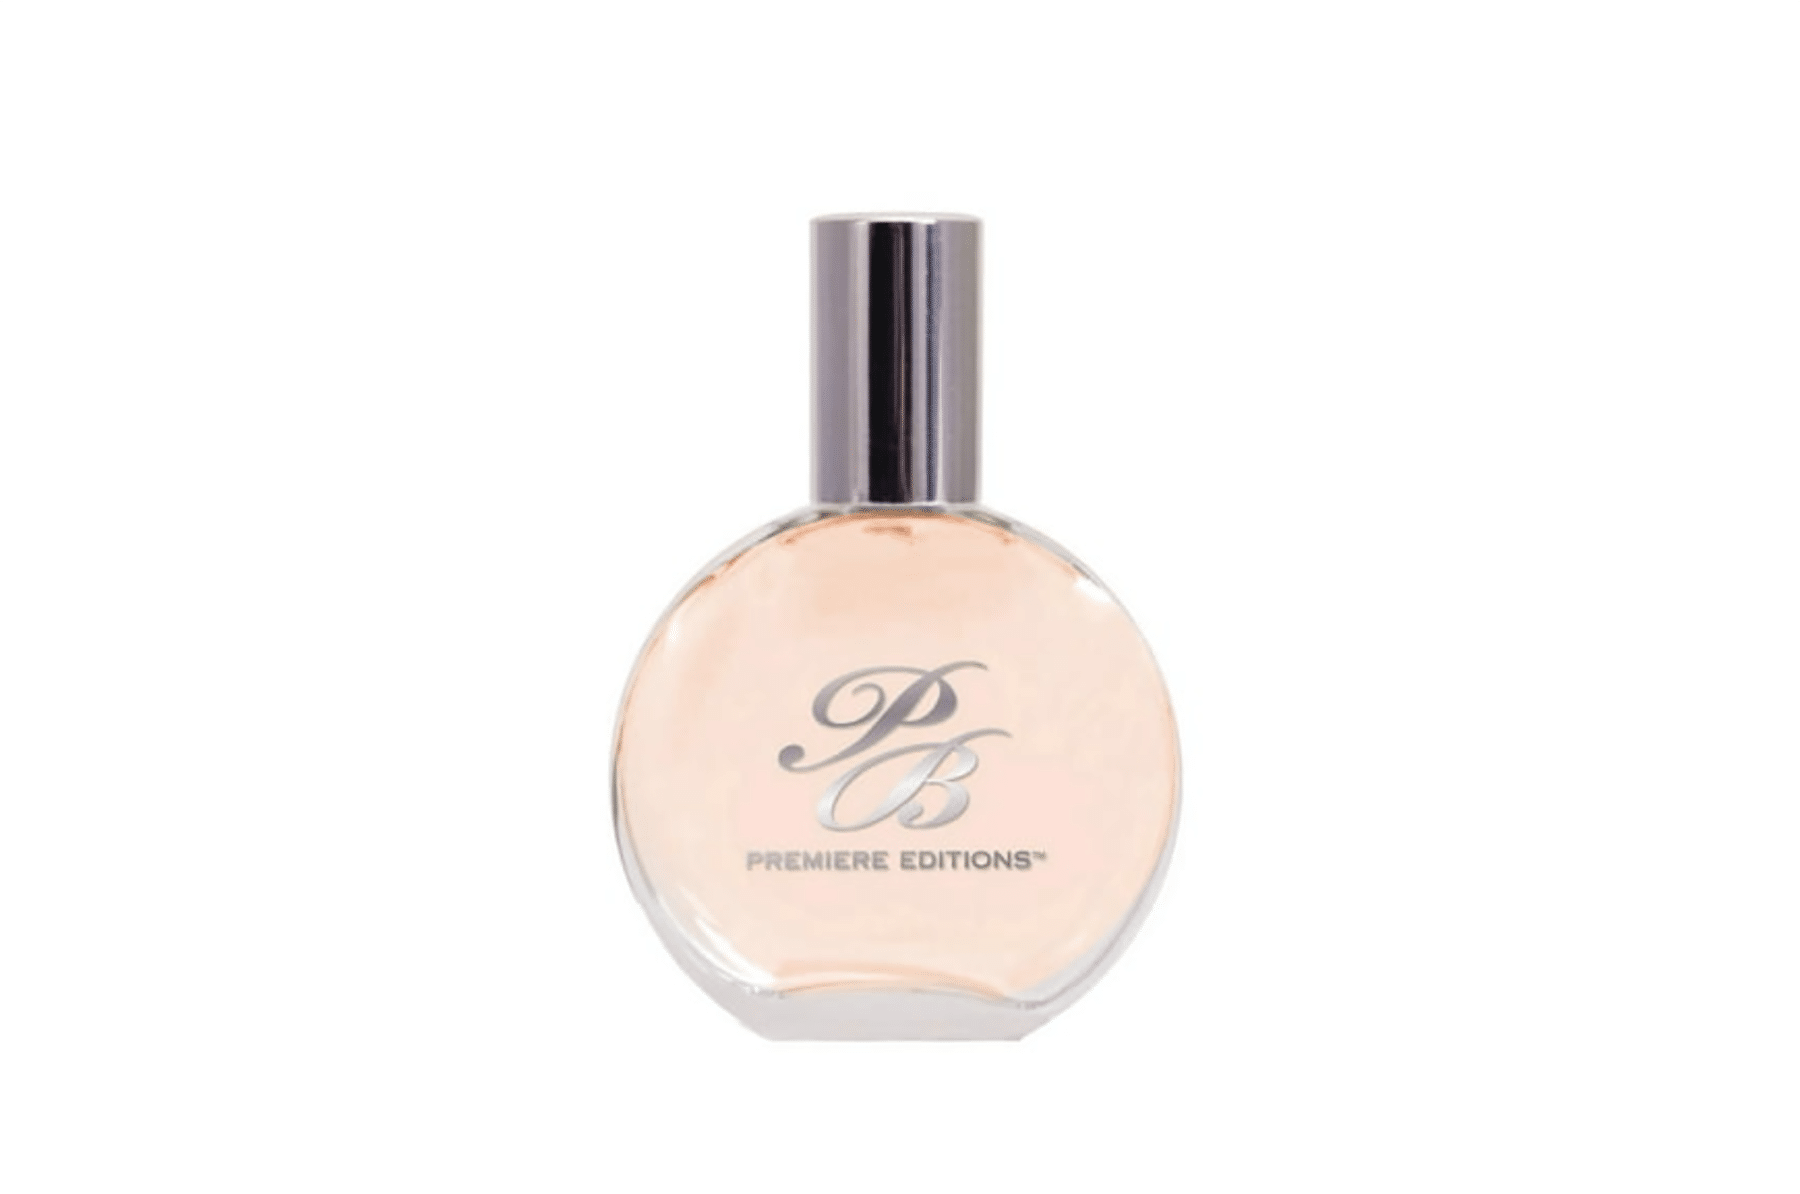 7 Chanel Chance Dupes That'll Leave You Smelling Like Luxury